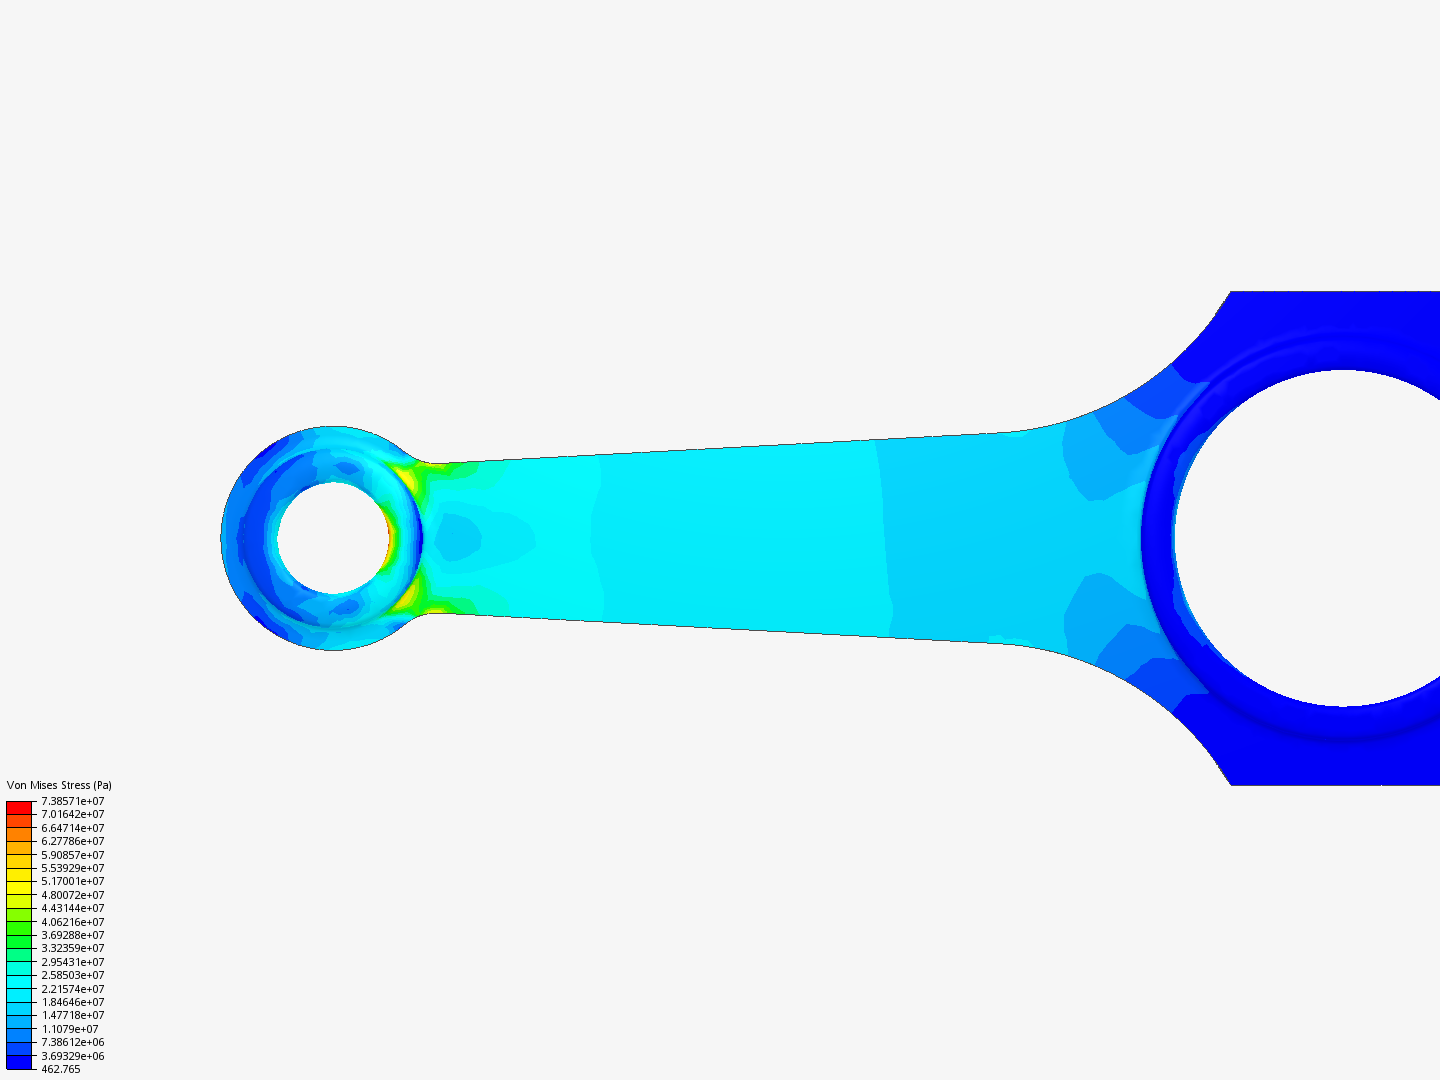 ANALYSIS 1 CONNECTING ROD - Copy image